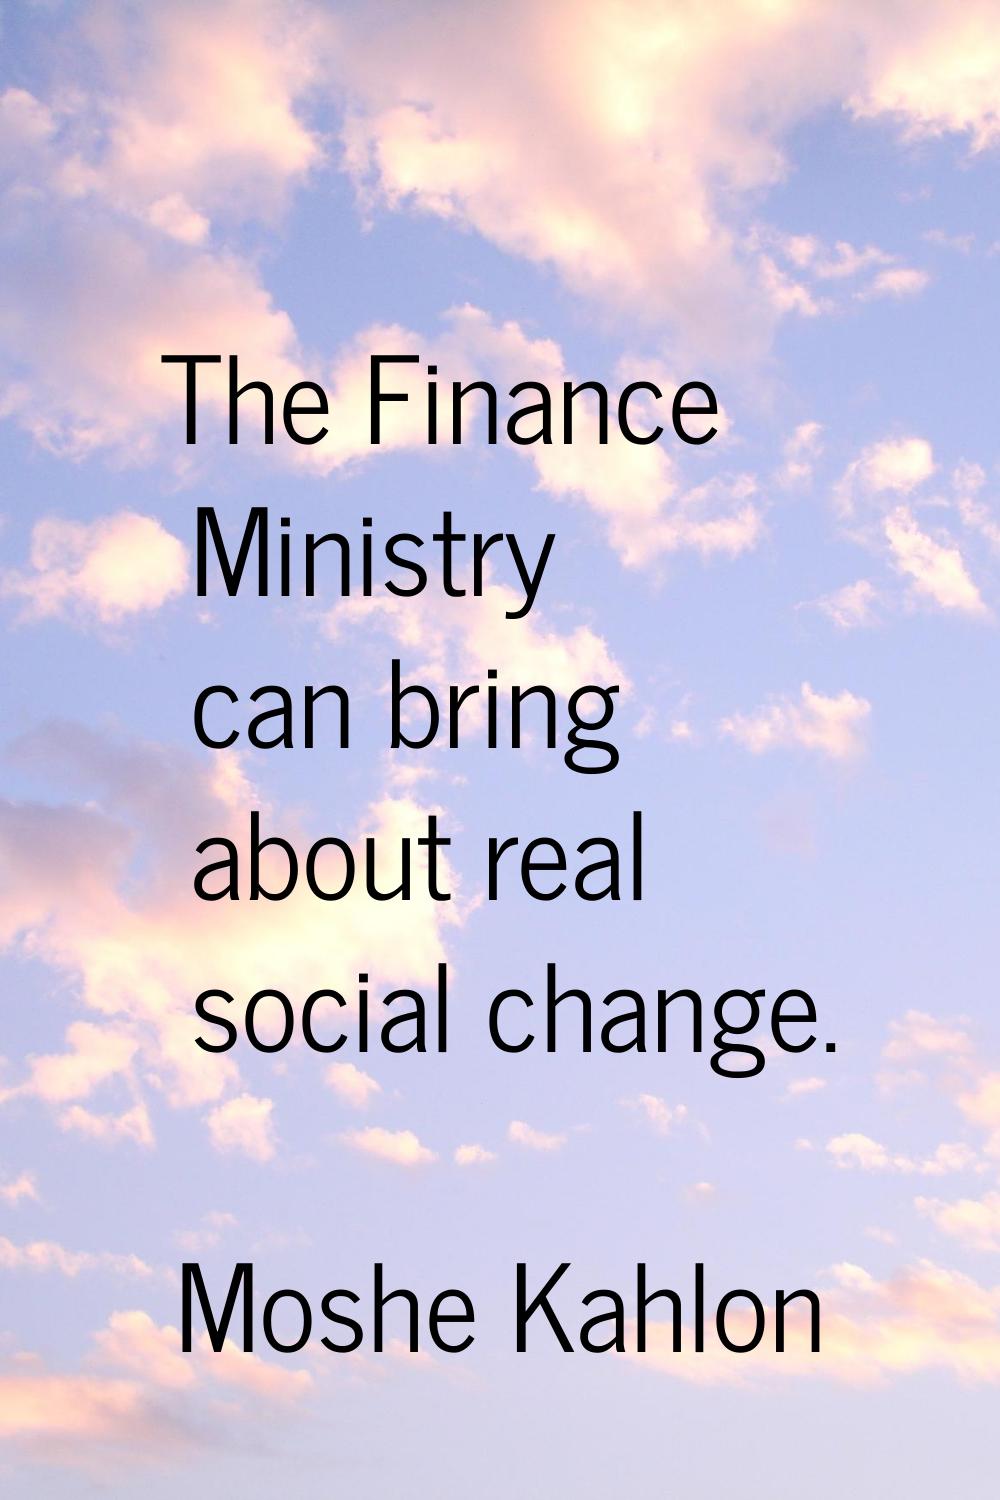 The Finance Ministry can bring about real social change.